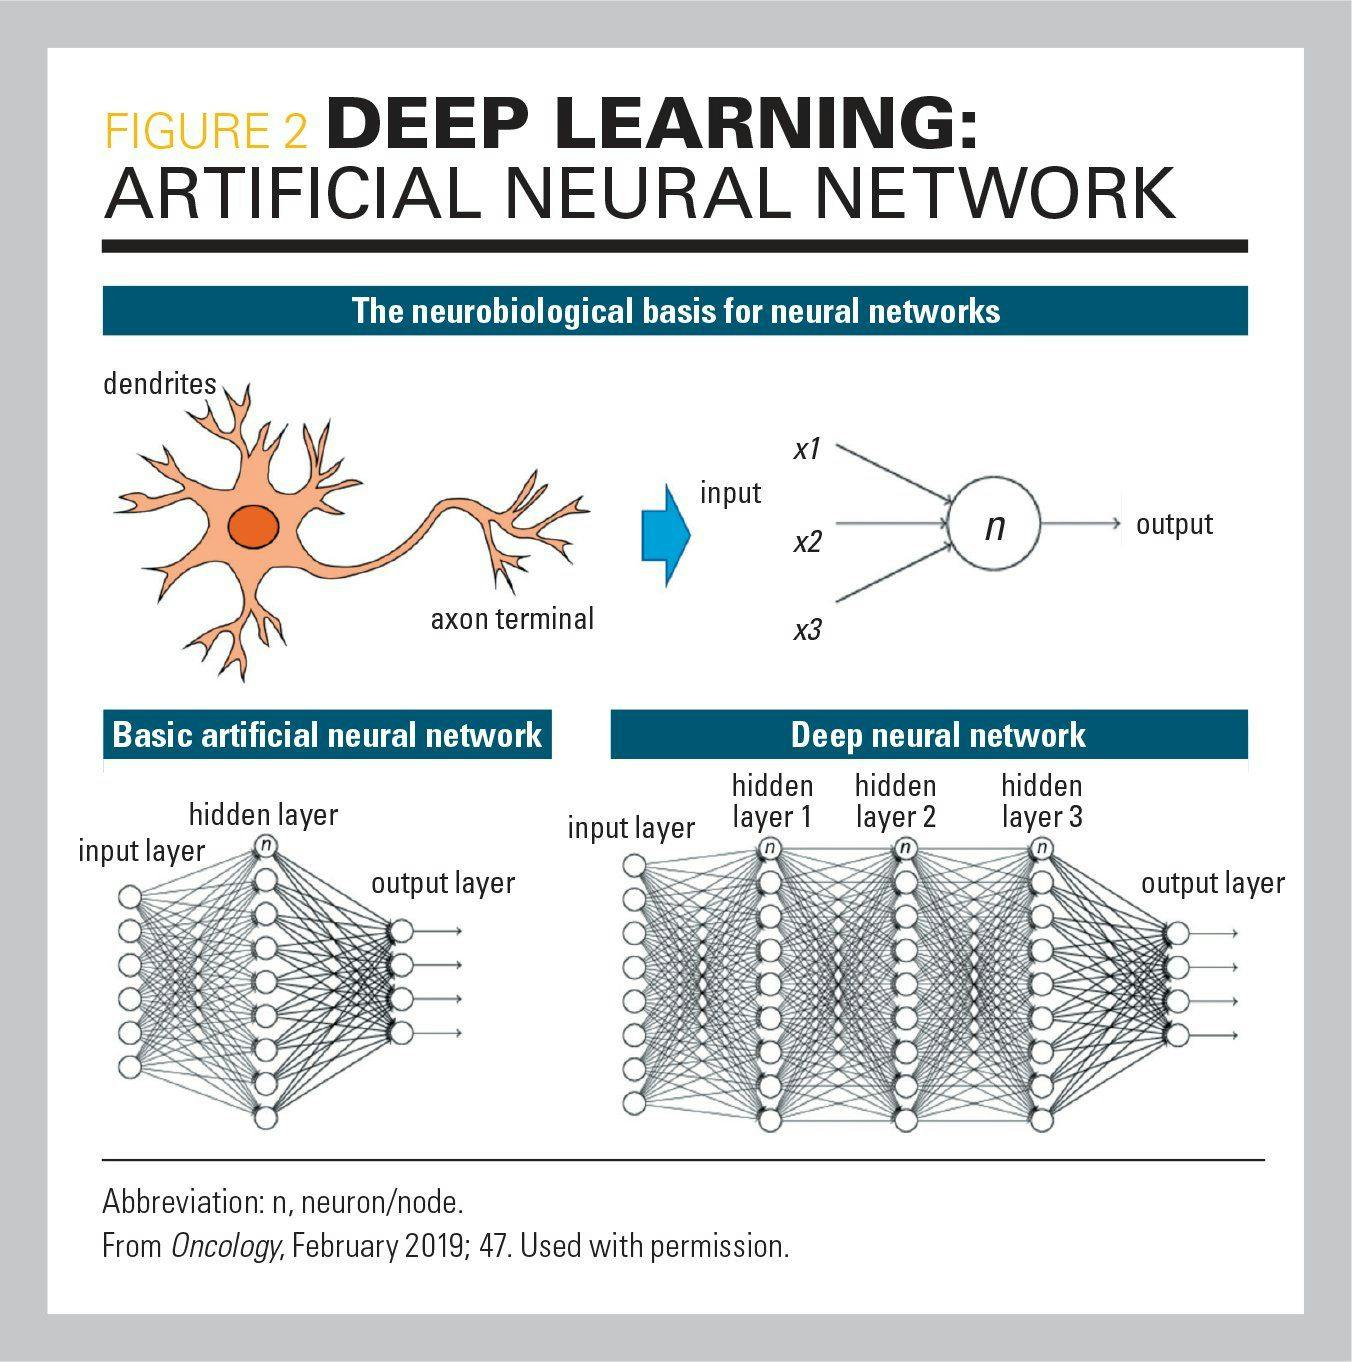 illustration of deep learning: artificial neural network